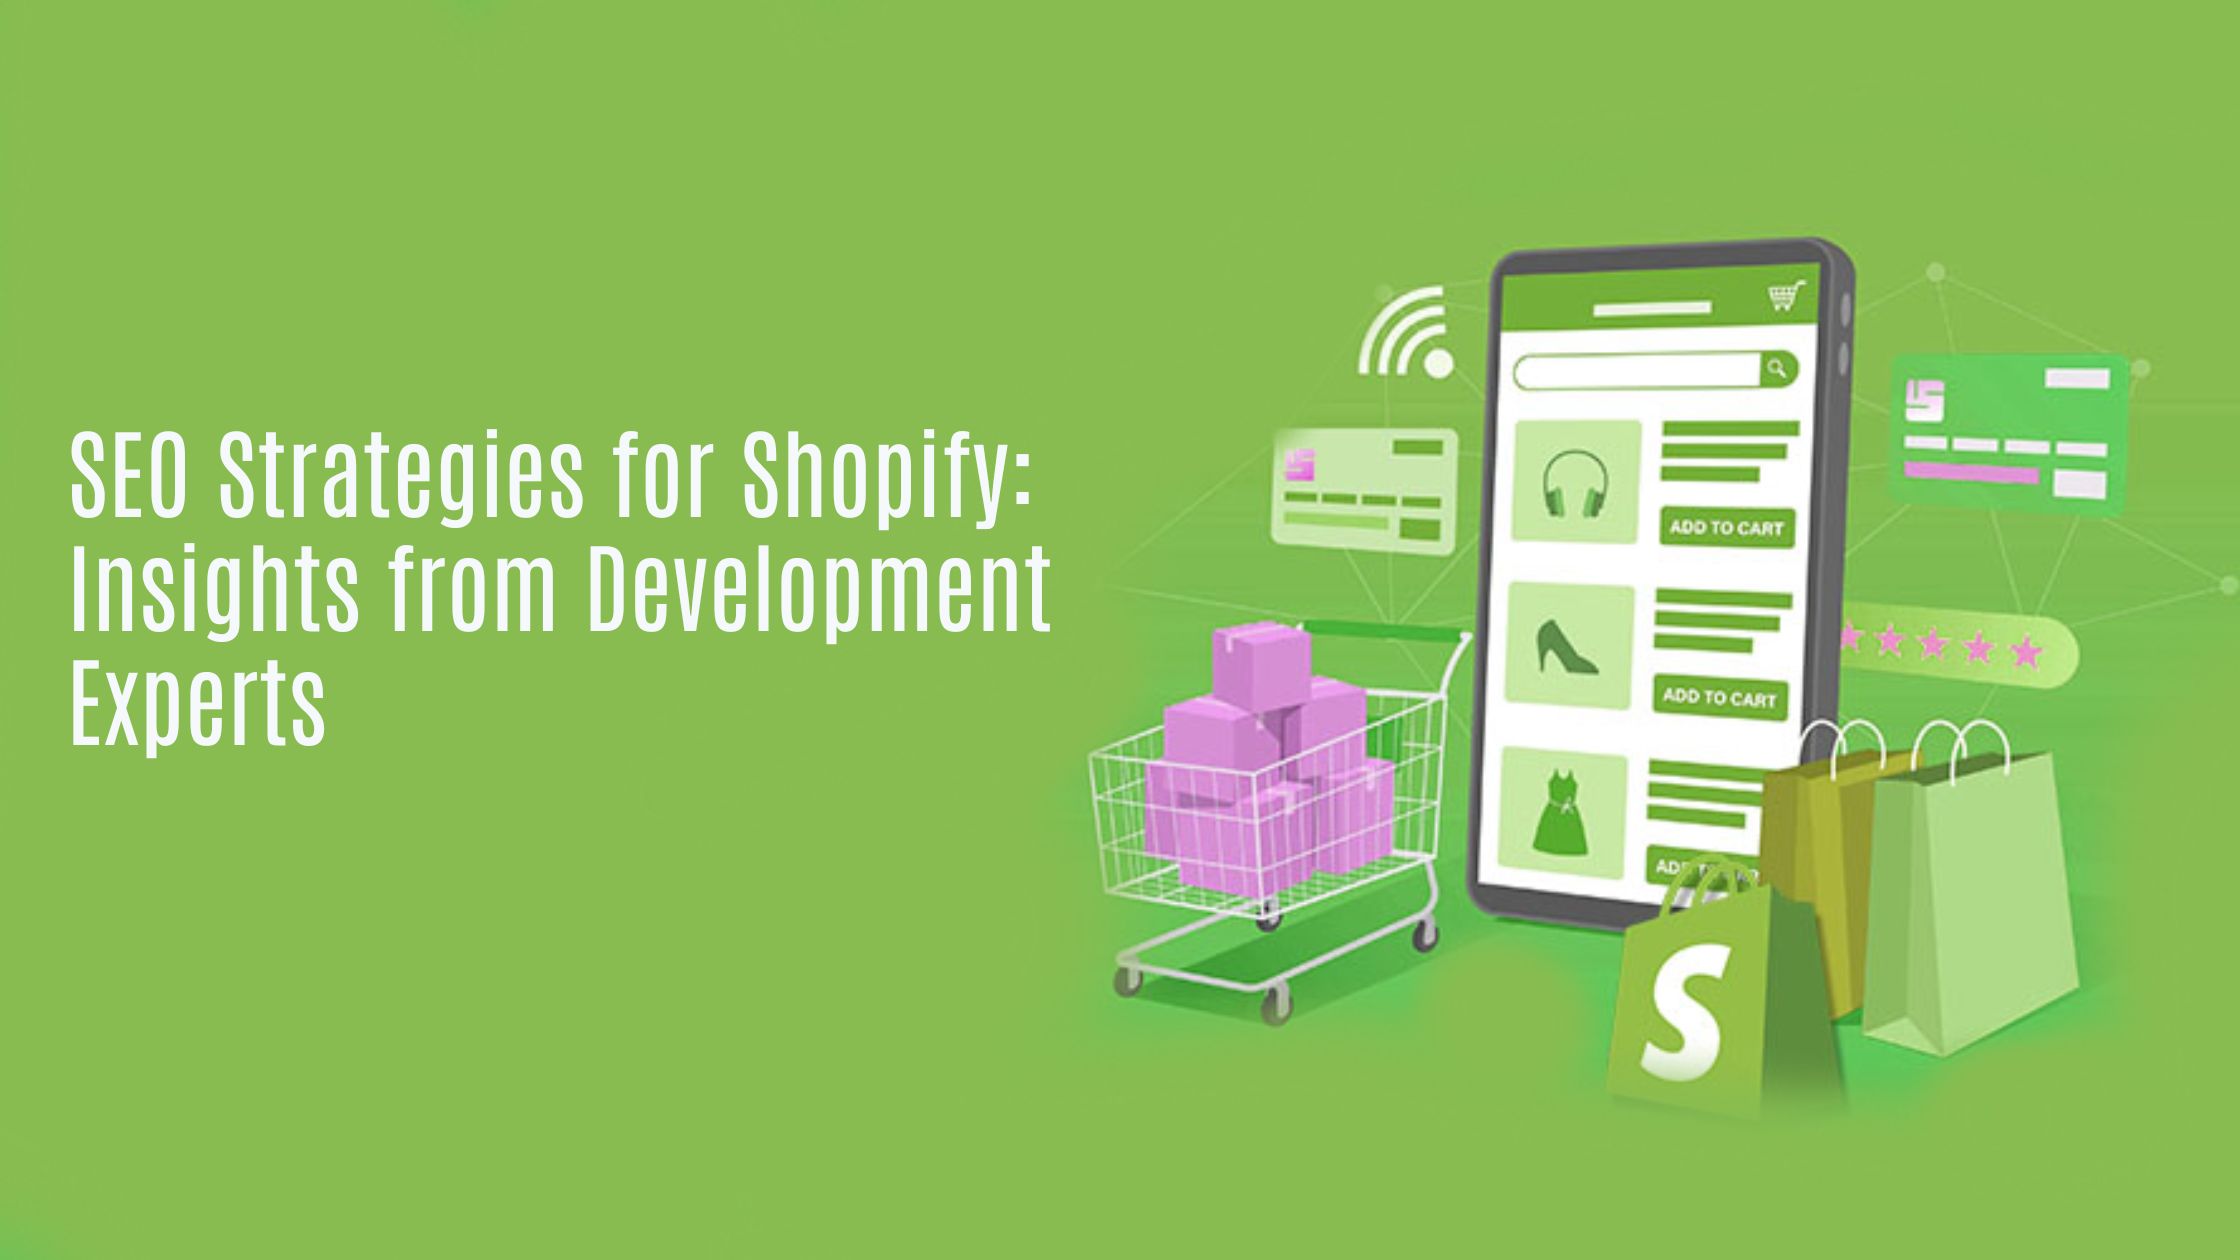 SEO Strategies for Shopify Insights from Development Experts